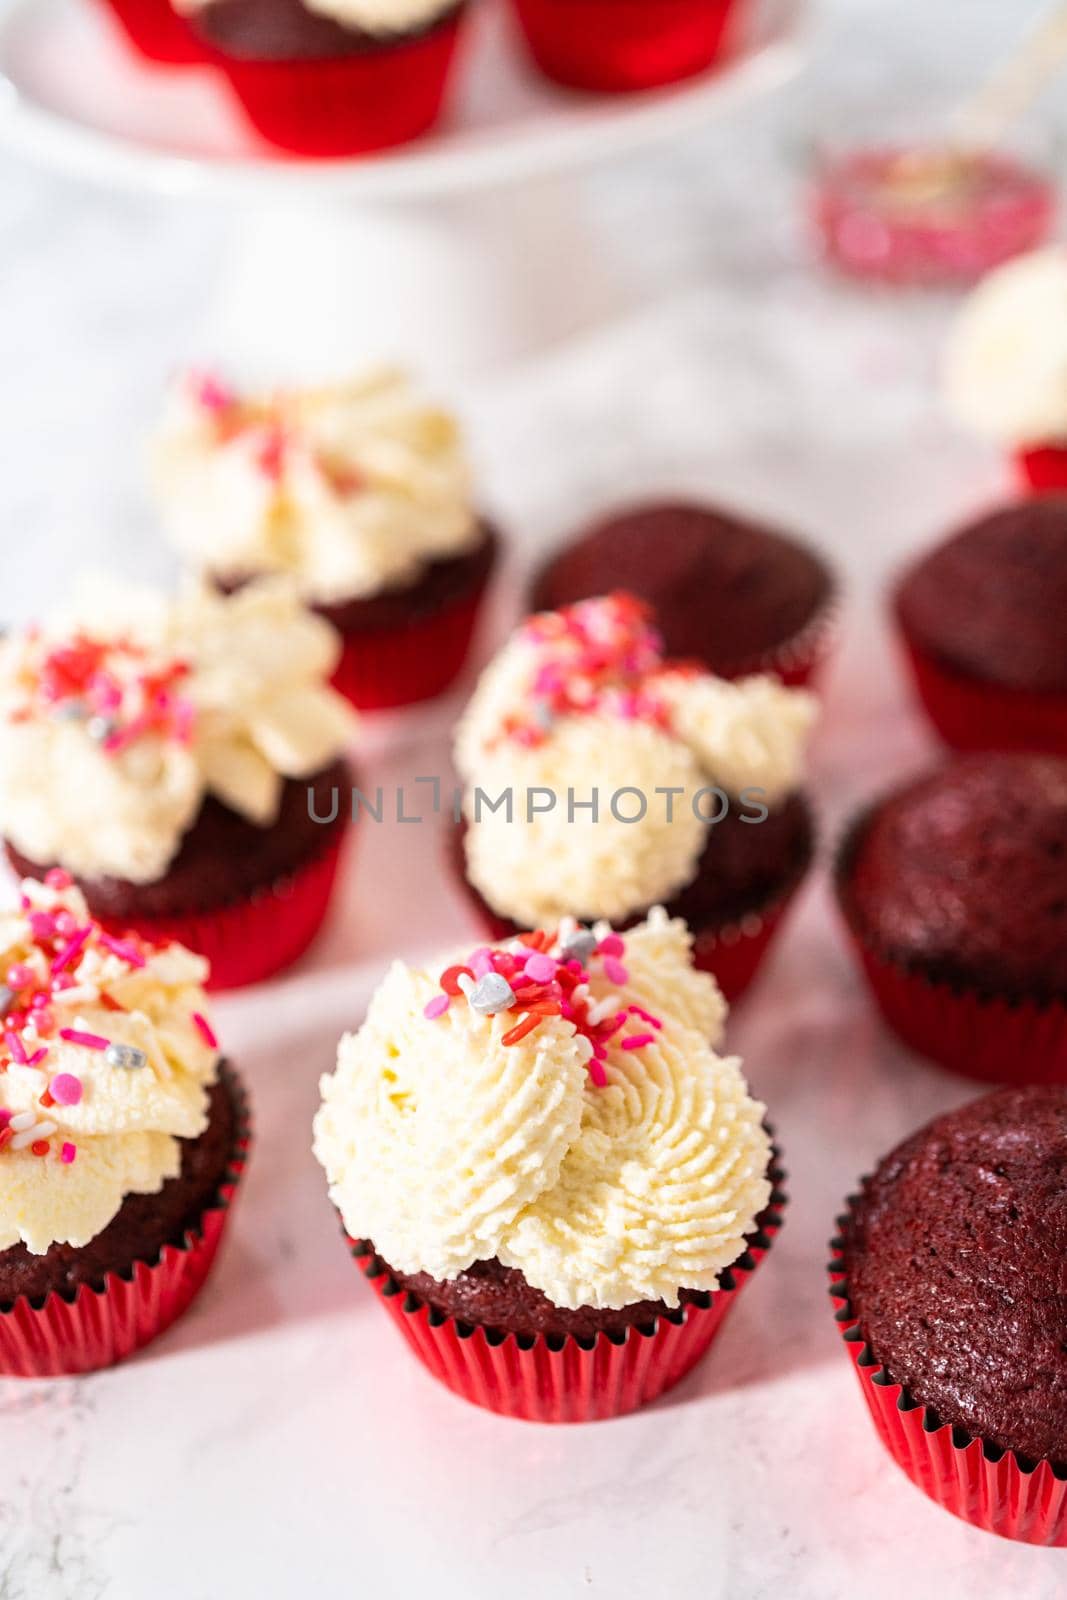 Red Velvet Cupcakes with White Chocolate Ganache Frosting by arinahabich